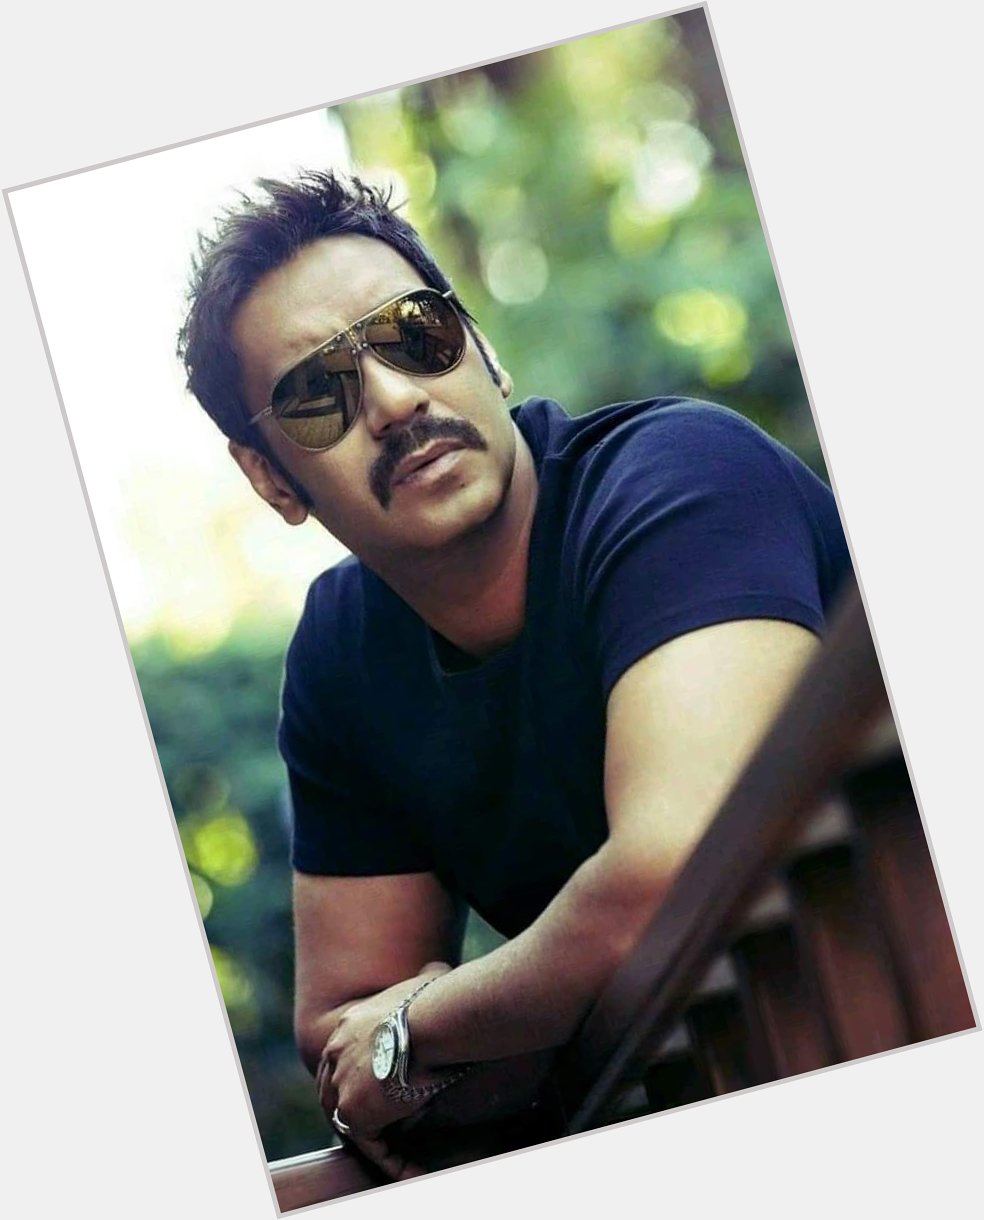 My favorite actor is Bollywood superstar actor Ajay Devgan. Happy birthday to you..!
GOD BLESS YOU.. 